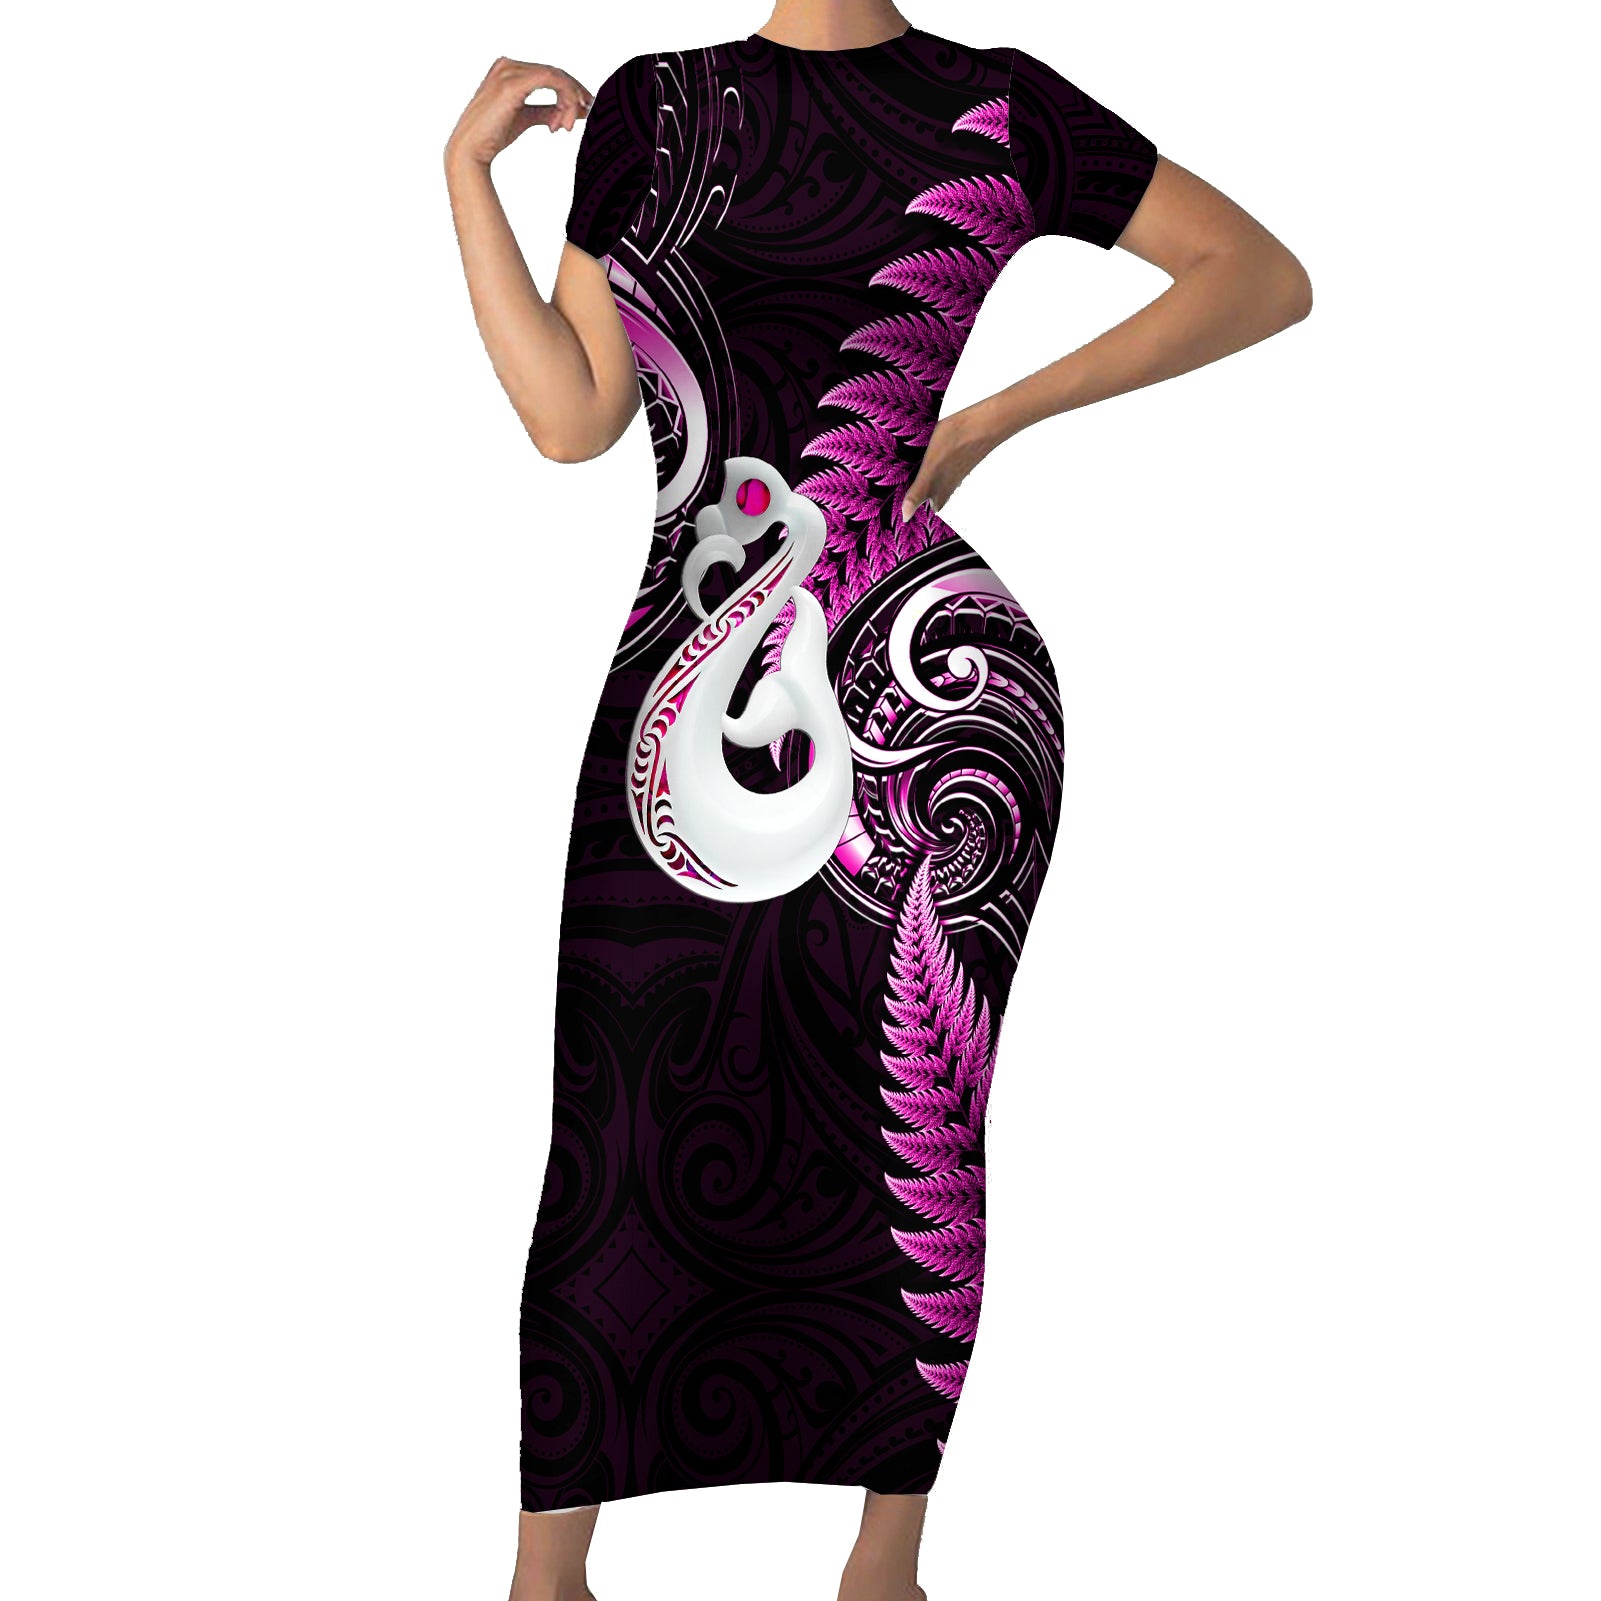 Personalised New Zealand Short Sleeve Bodycon Dress Aotearoa Silver Fern With Manaia Maori Unique Pink LT14 Long Dress Pink - Polynesian Pride